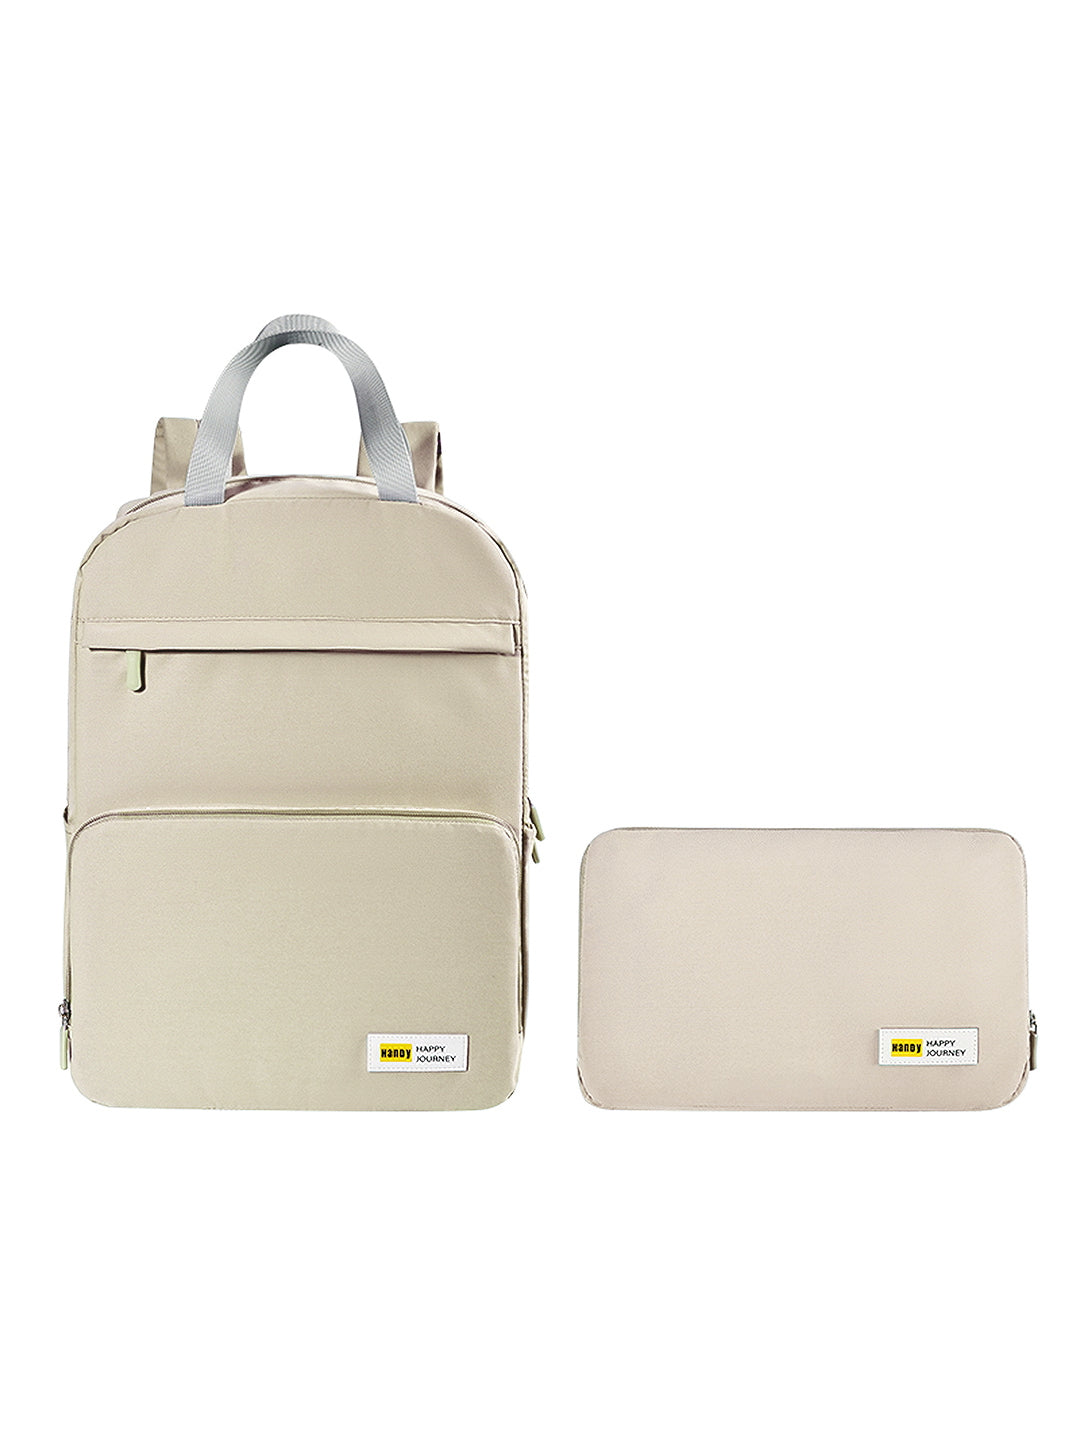 foldable-travelling-bag-offwhite